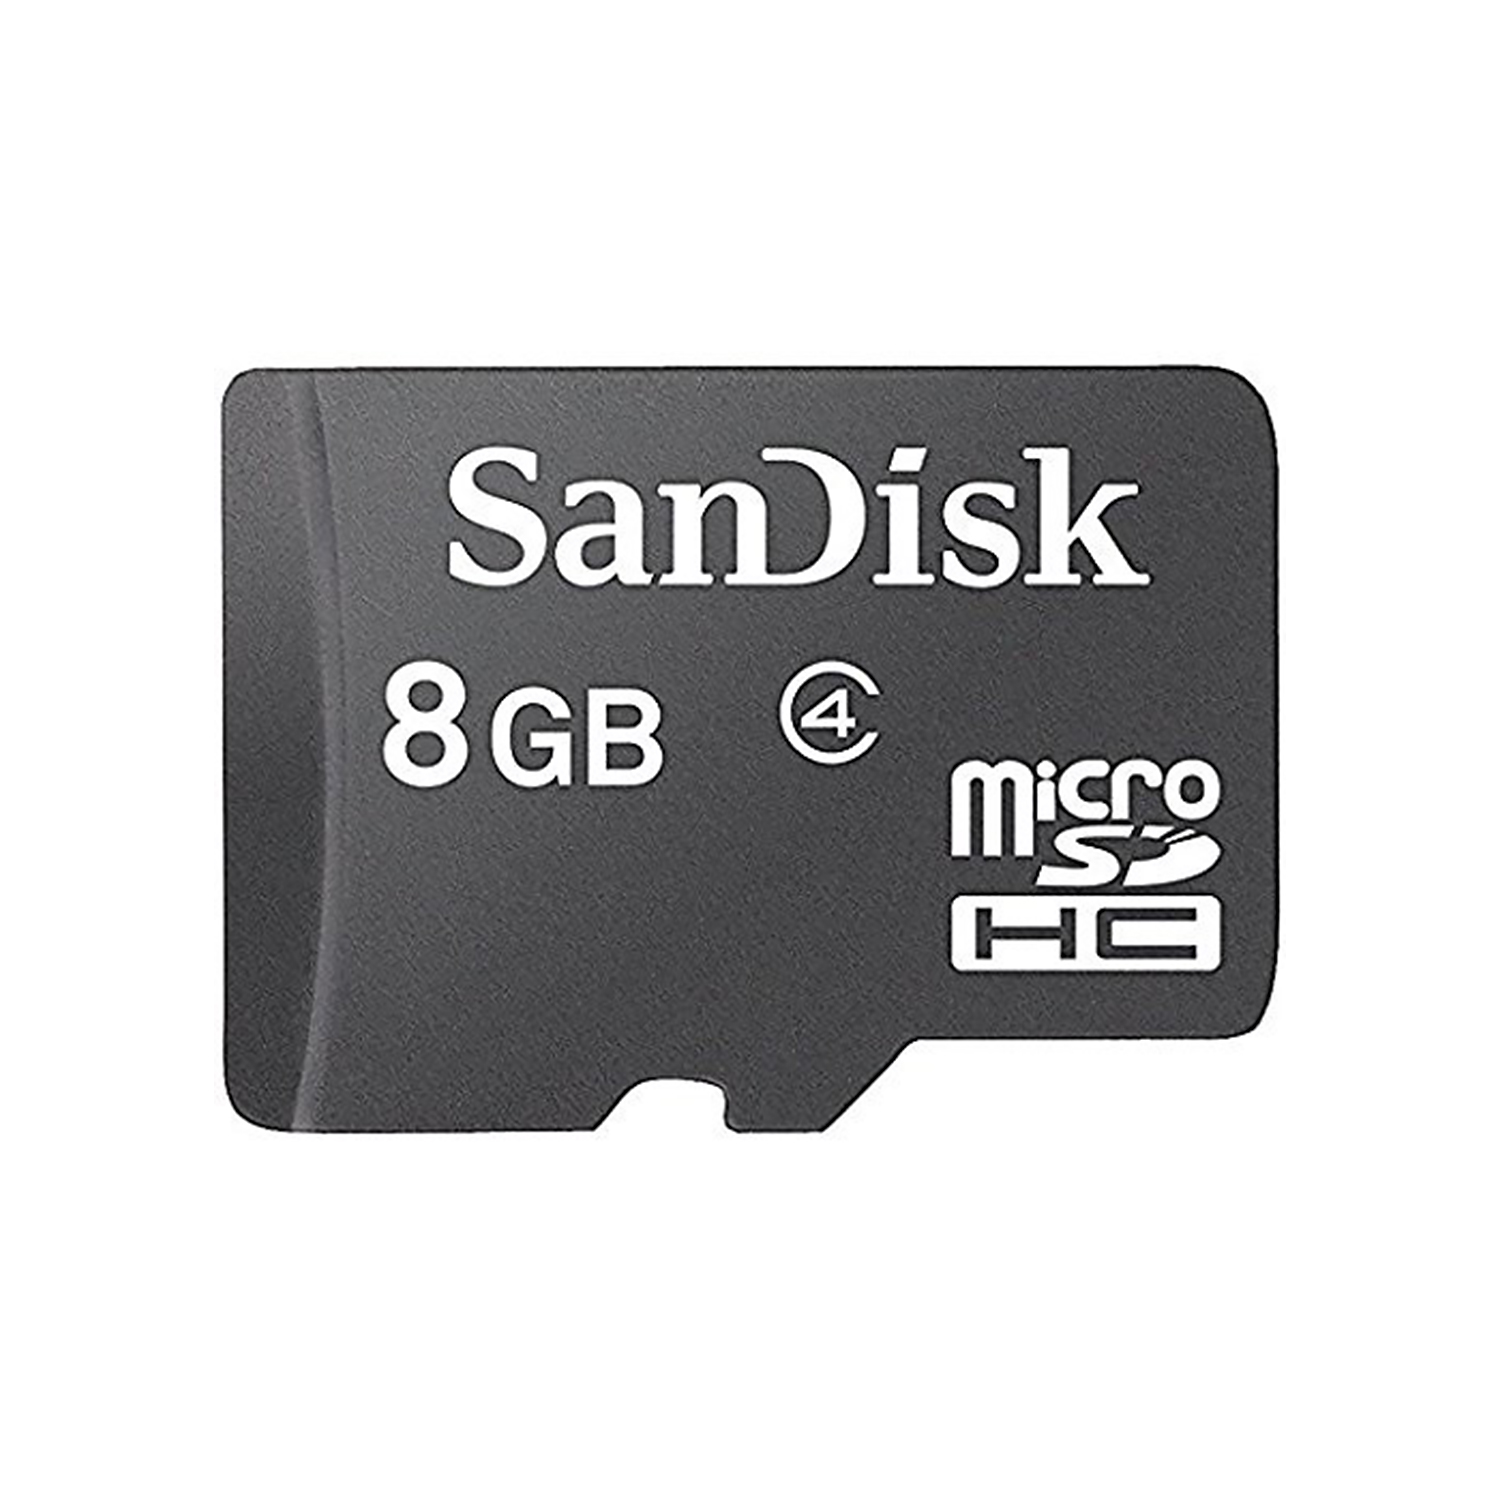 3 Pack SanDisk Micro SDHC 8 GB Memory Card